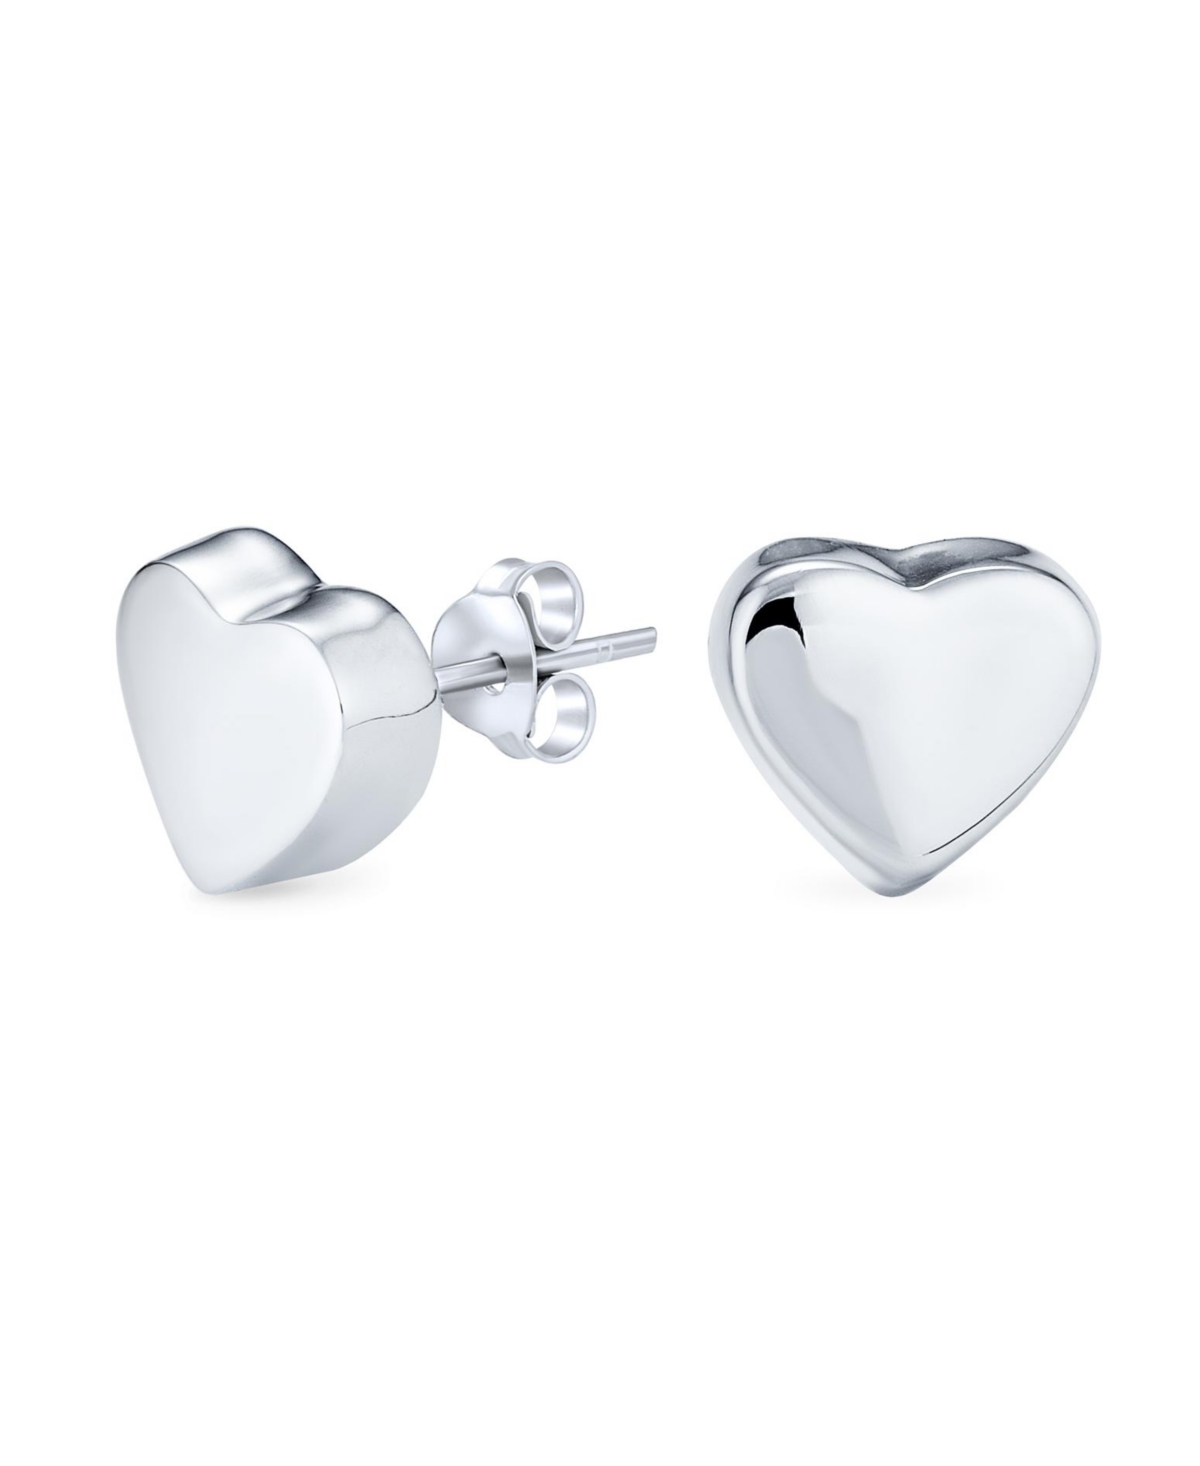 Personalize Abc Initial Monogram Romantic Simple Love Heart Shaped Stud Earrings For Women Girlfriend Teen Polished .925 Sterling Silver